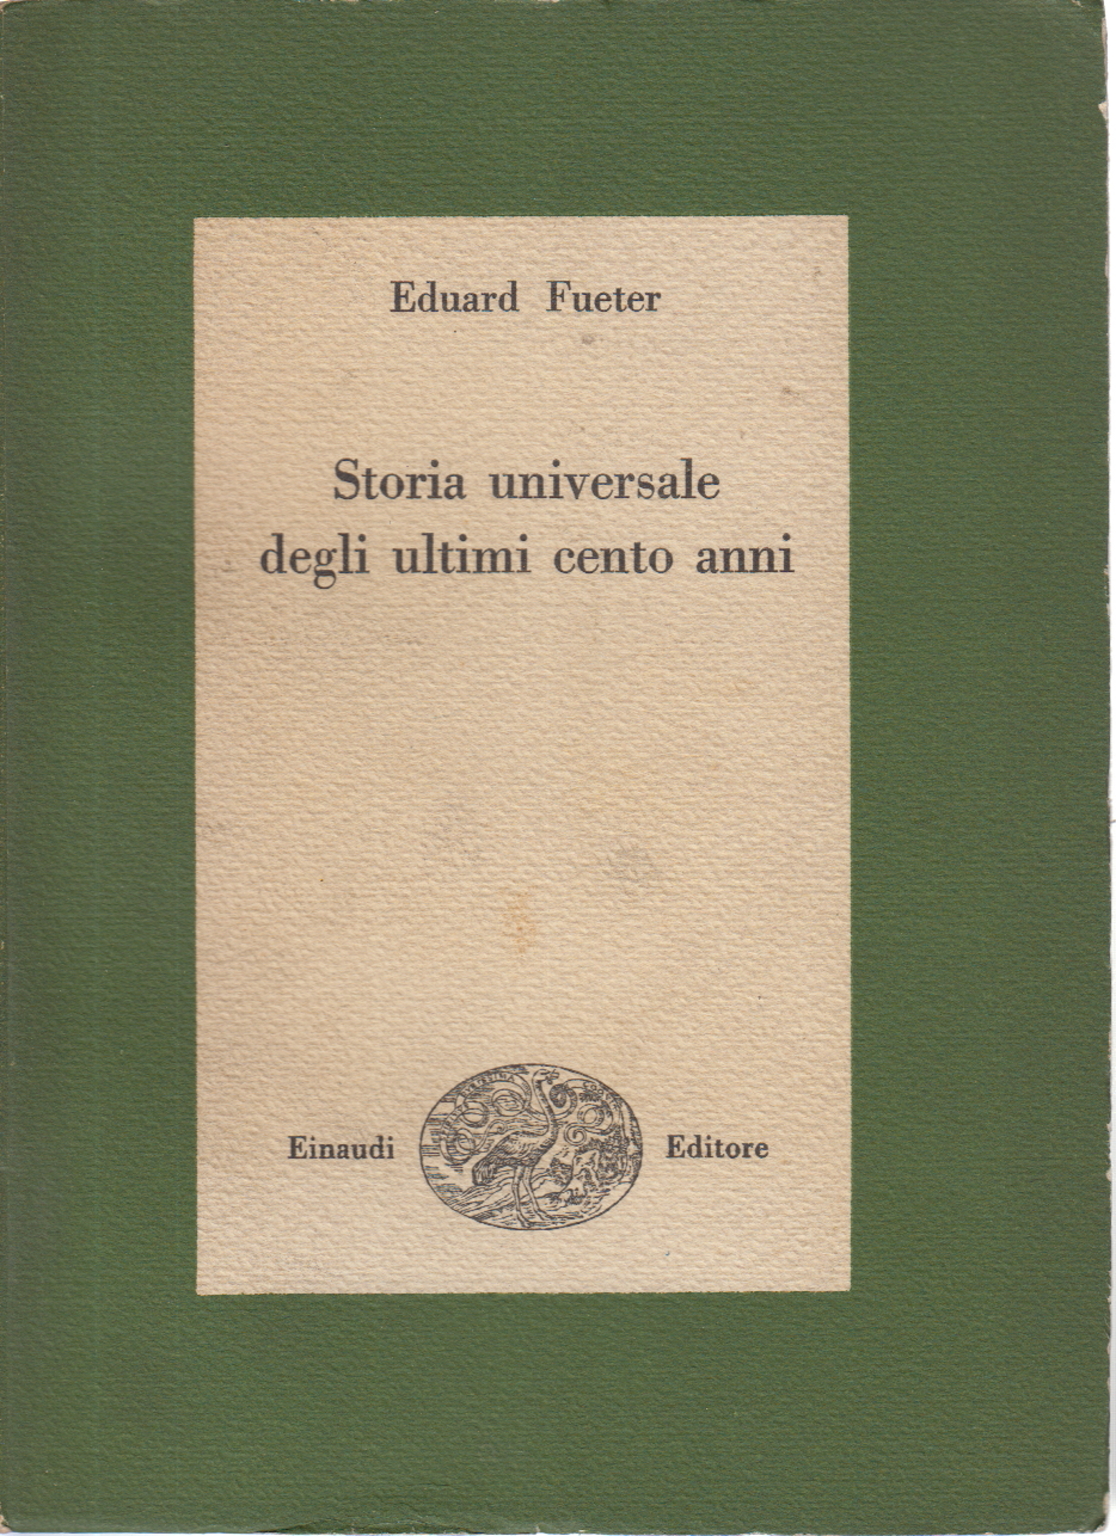 The universal history of the last hundred years 1815-192, Eduard Fueter